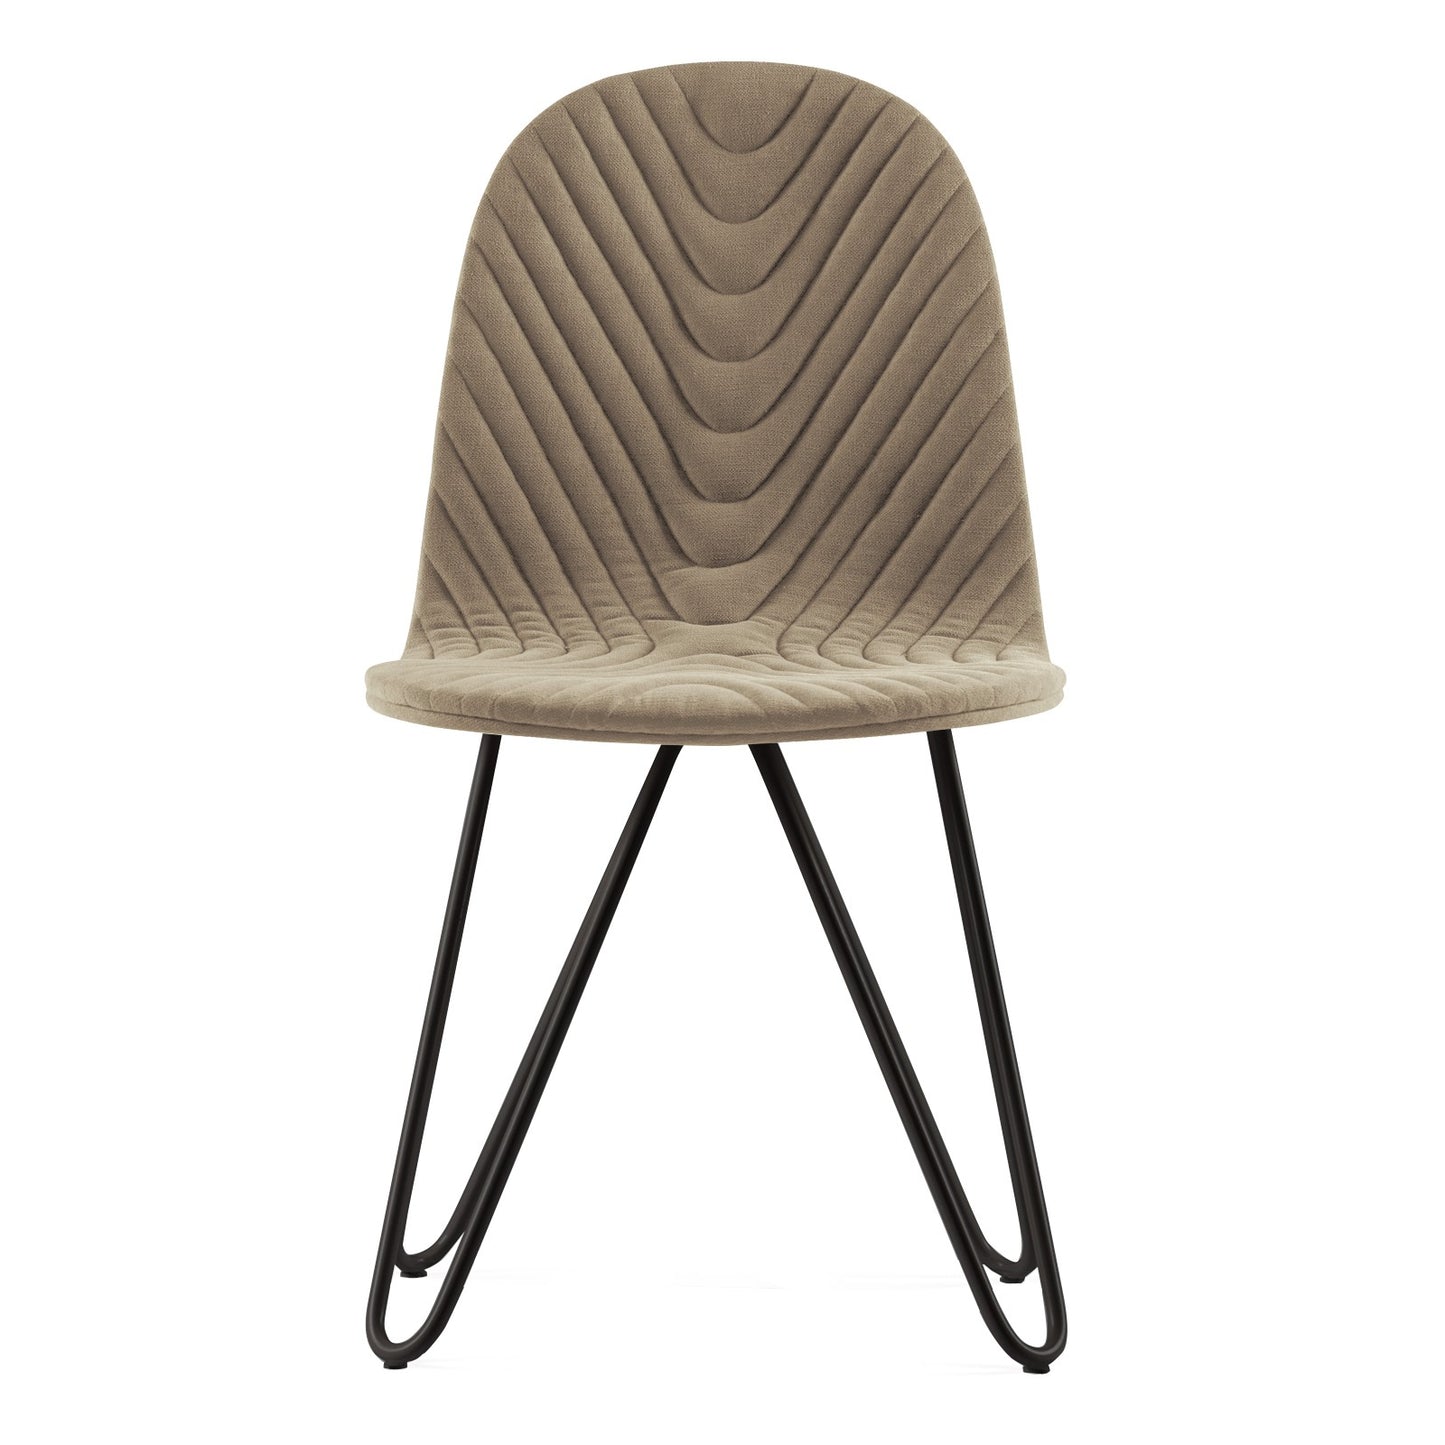 Chair Mannequin 03 - Coffee